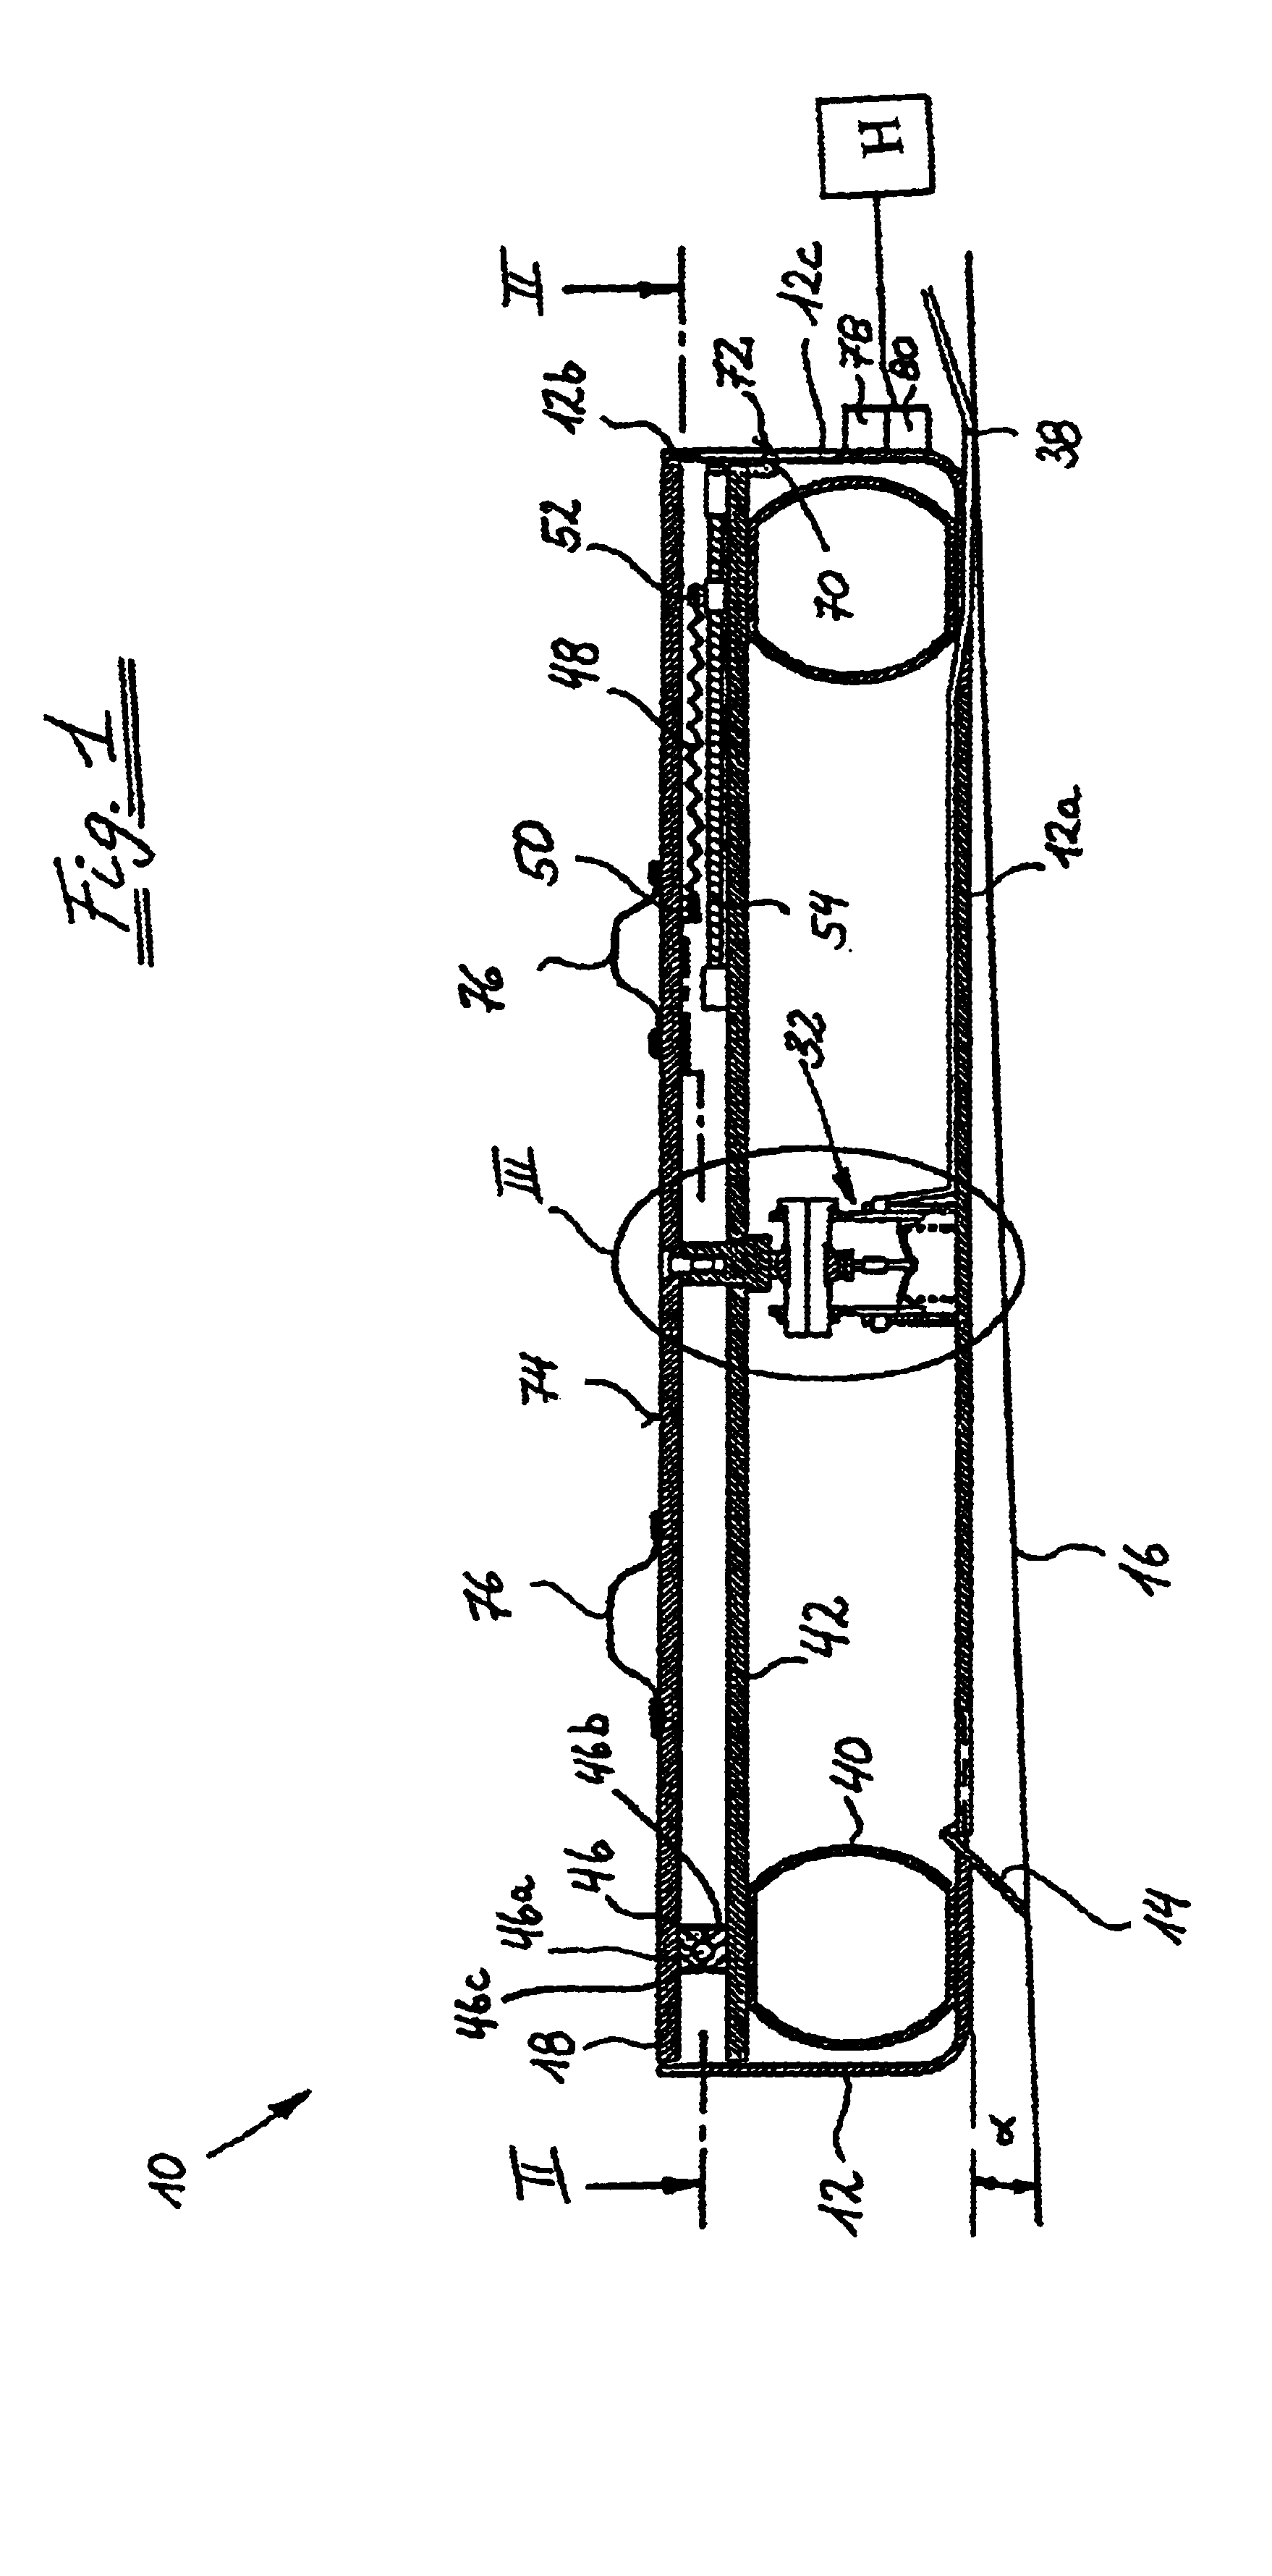 Method and device for detecting specific states of movement of a user